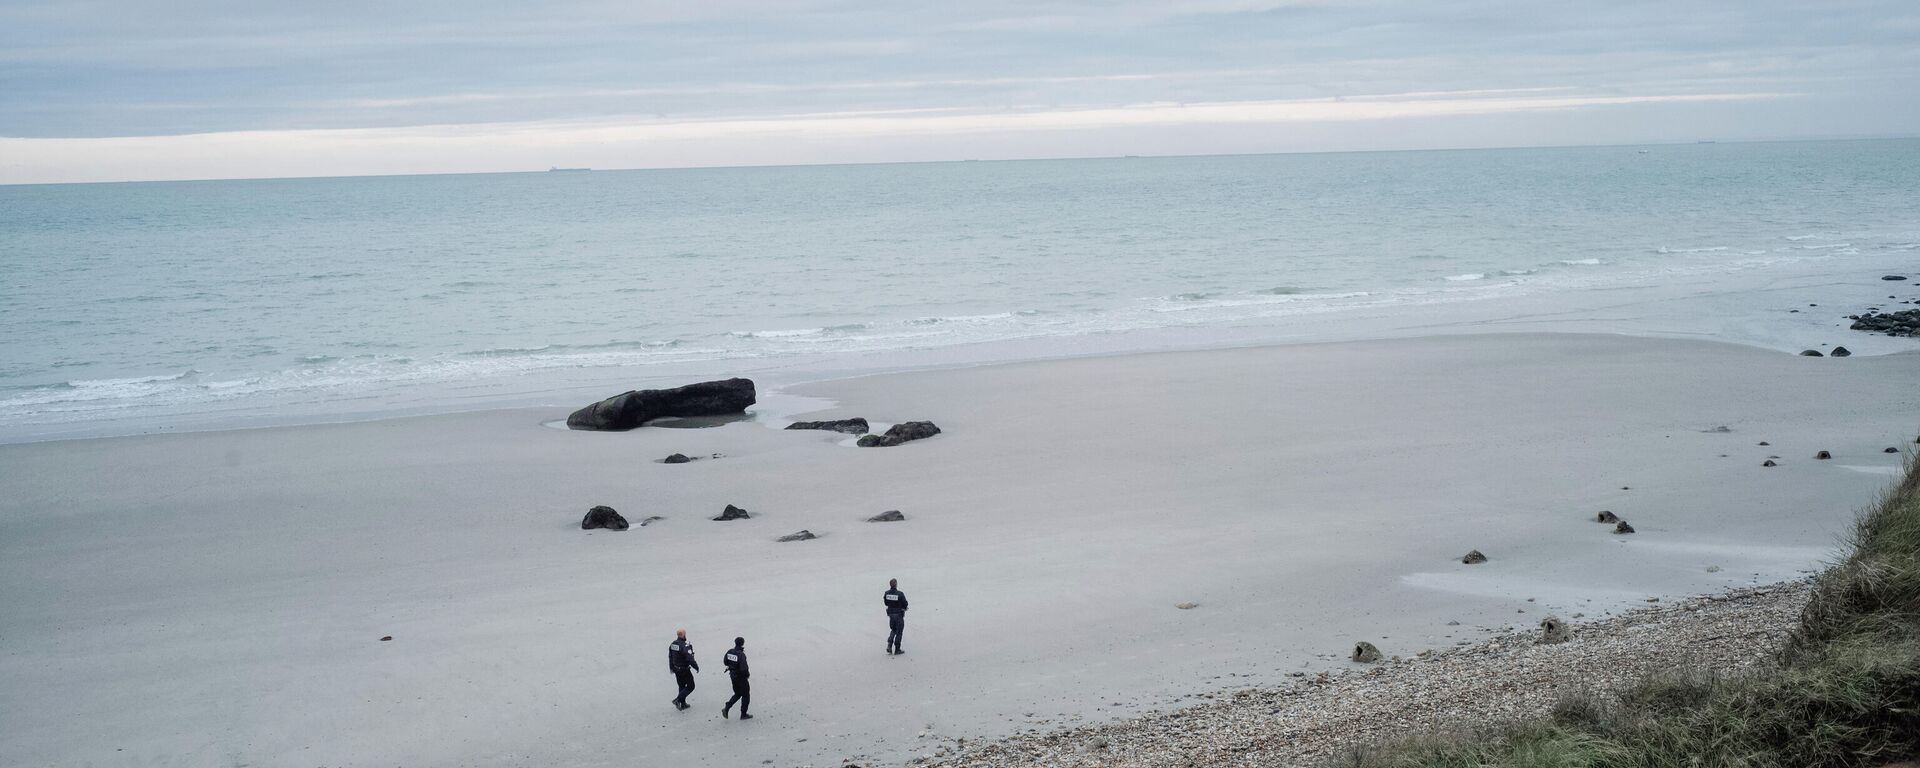 French police officers patrol on the beach in the searcher migrants in Wimereux, northern France, Wednesday, Nov.17, 2021. Several migrants died and others were injured Wednesday Nov.24, 2021 when their boat capsized off Calais in the English Channel as they tried to cross from France to Britain, authorities said. British and French authorities were searching the area using helicopters and coast guard vessels, according to the French maritime agency for the region. - Sputnik International, 1920, 03.12.2021